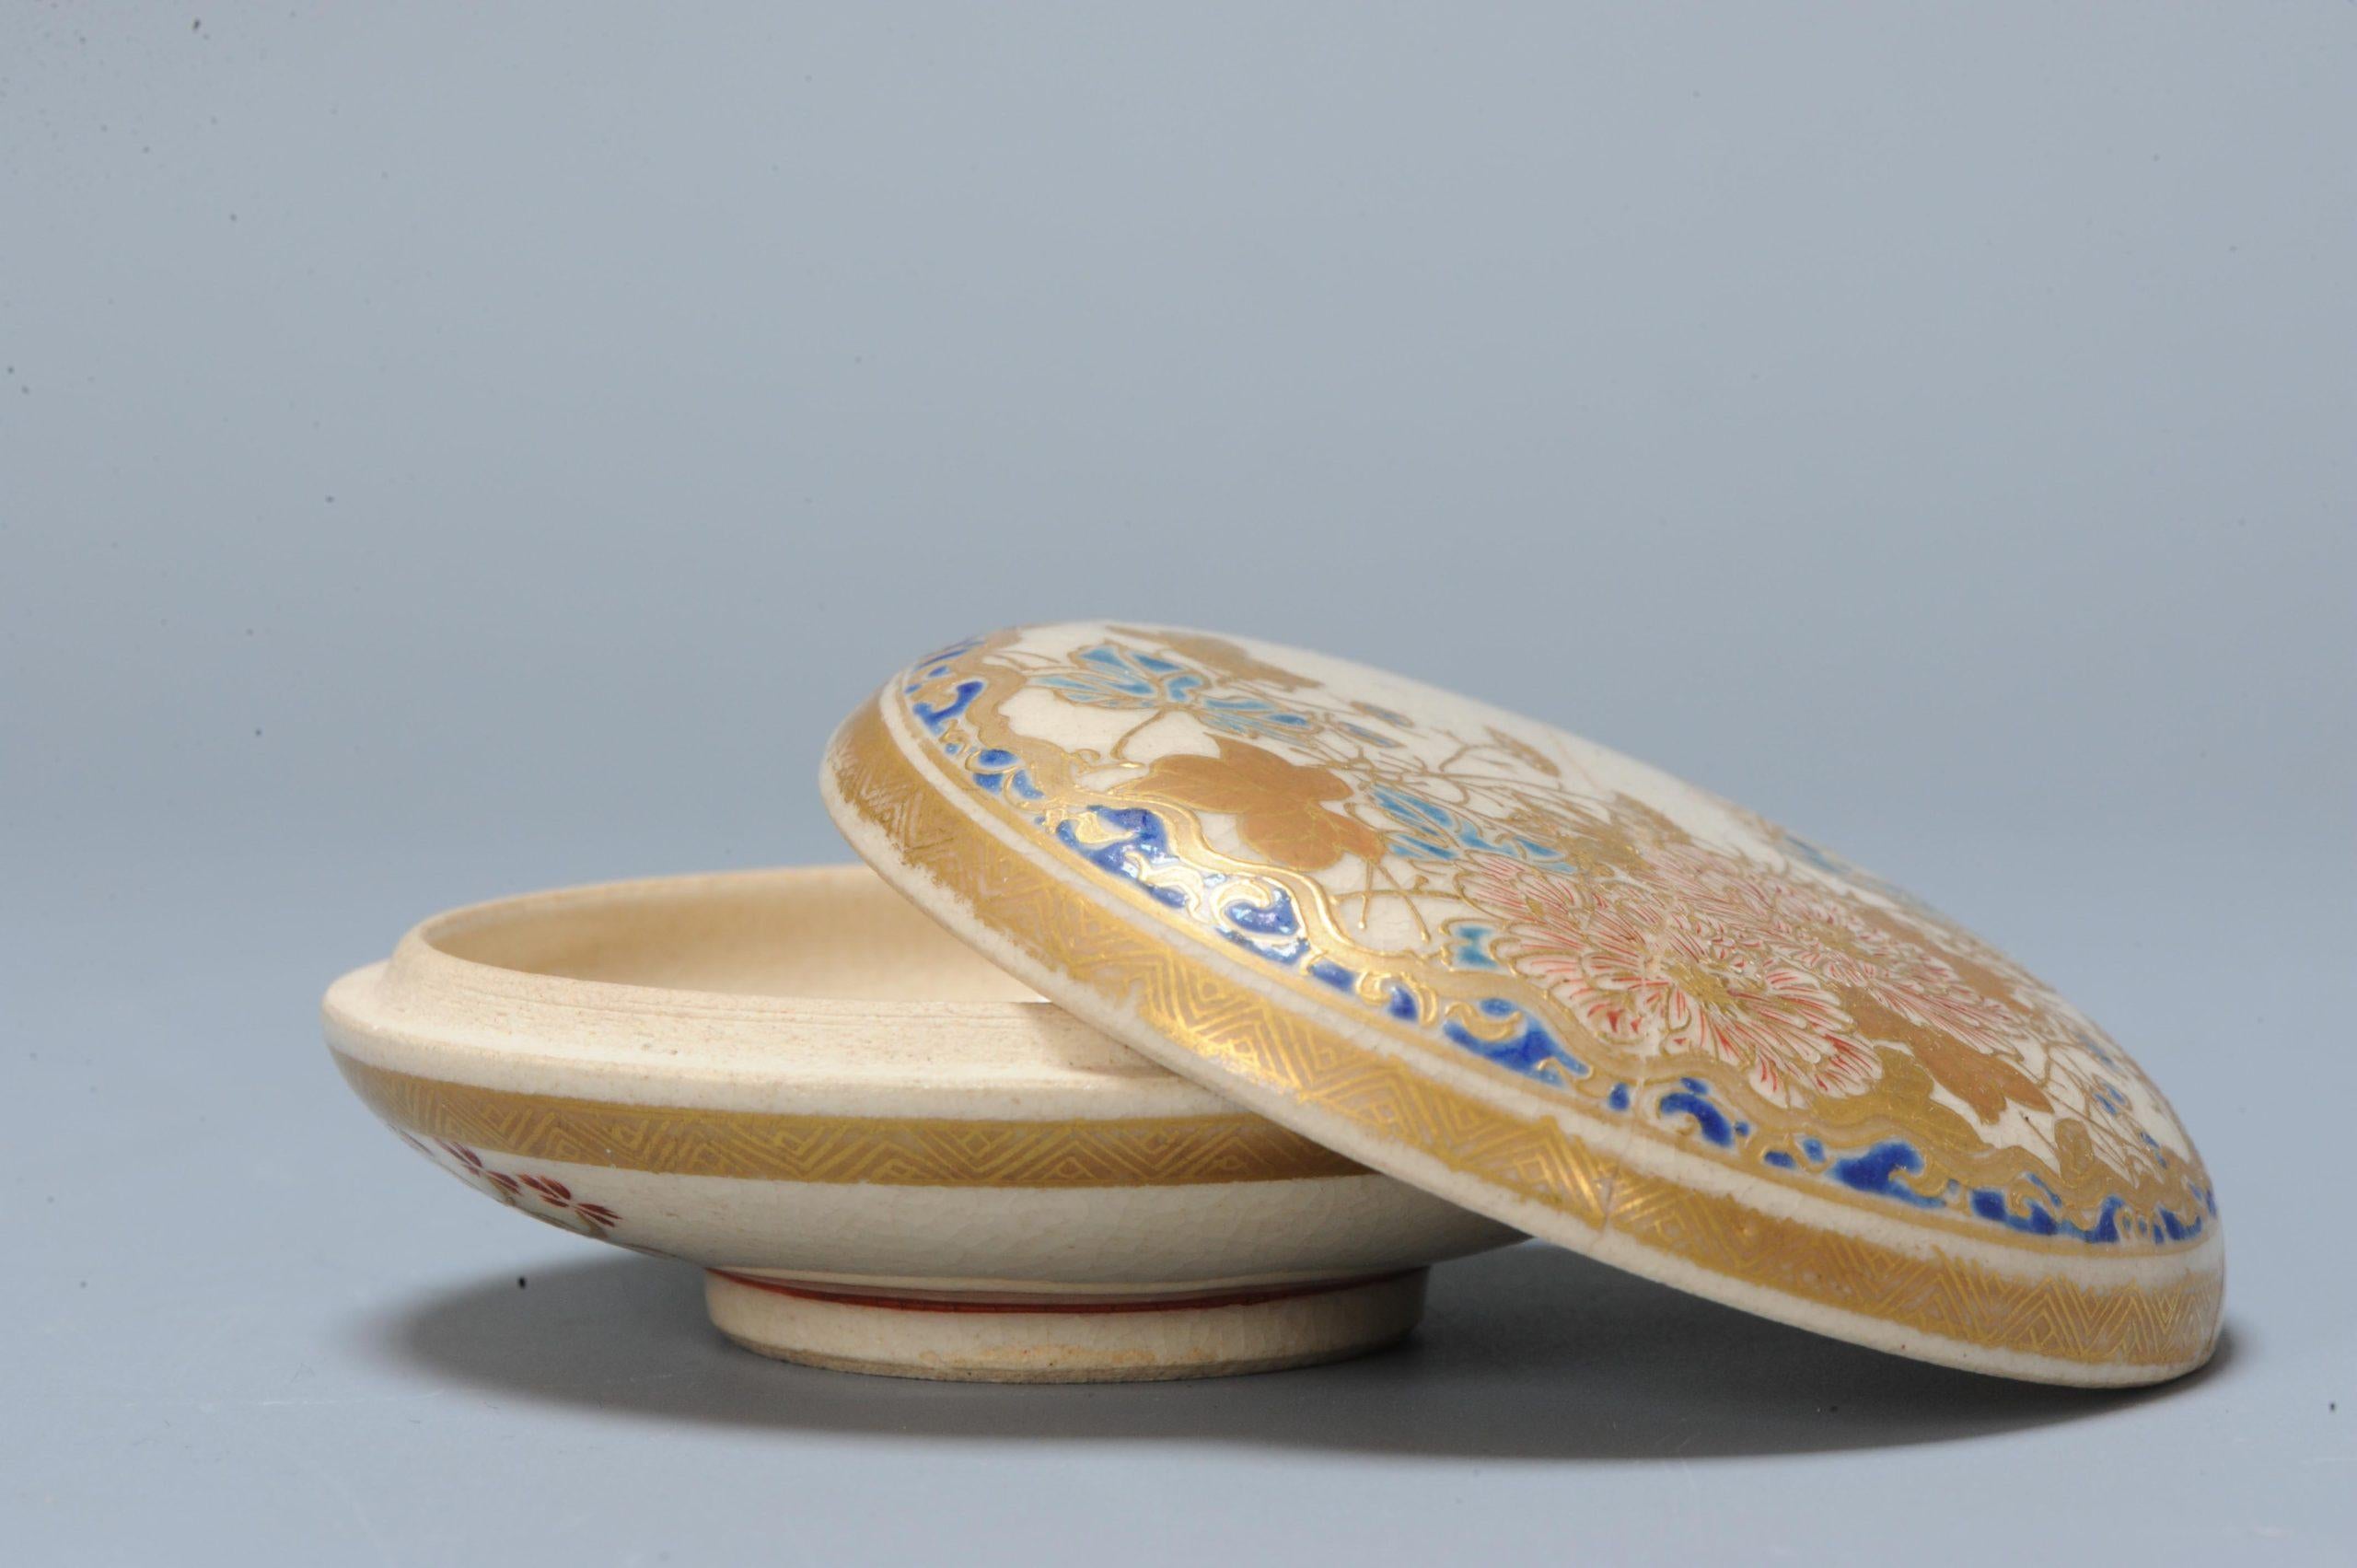 Fabulous Japanese earthenware Satsuma lidded box with nice decoration of flowers. Marked at base and also with Gosu Blue. Meiji period, 19th c

Lovely piece.

Additional information:
Material: Porcelain & Pottery
Type: Plates
Japanese Style: